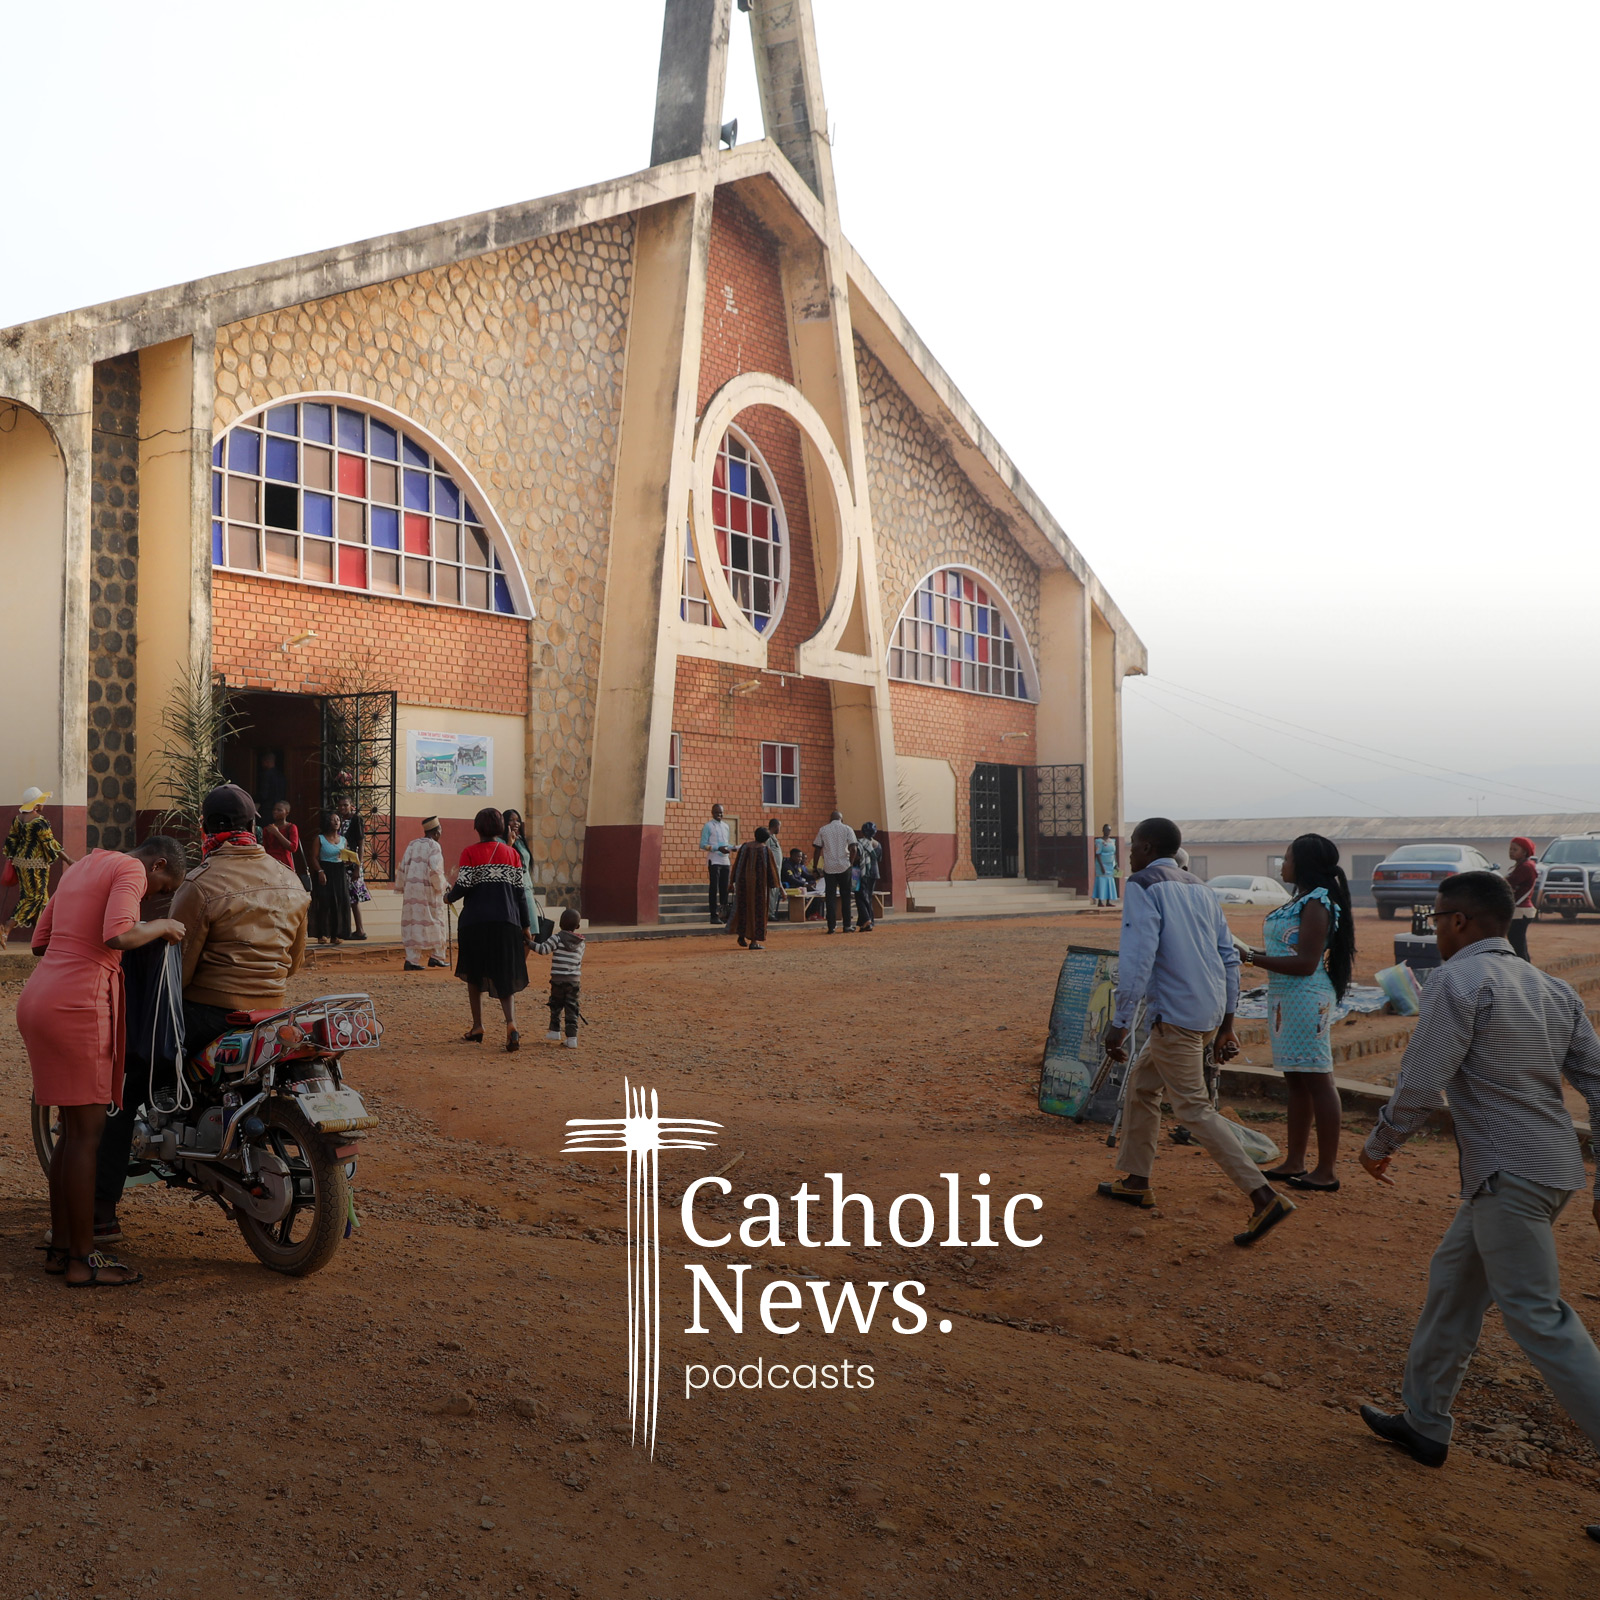 Faith gives hope to Cameroon’s suffering people